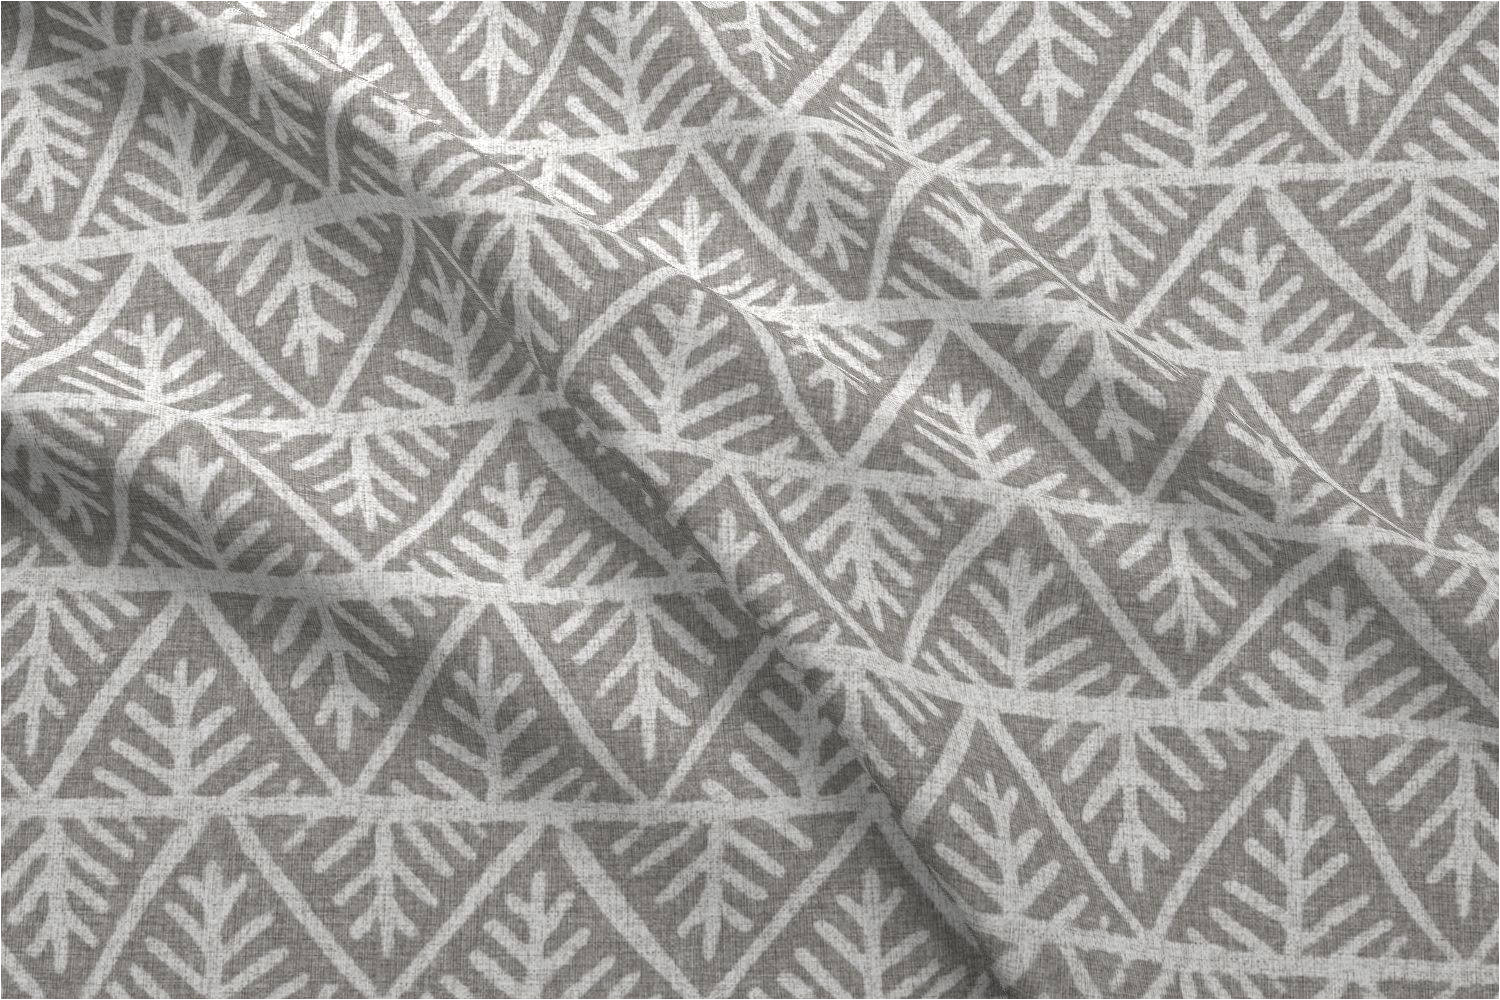 mudcloth fabric by the yard mudcloth fabric textured mudcloth in gray by etsy